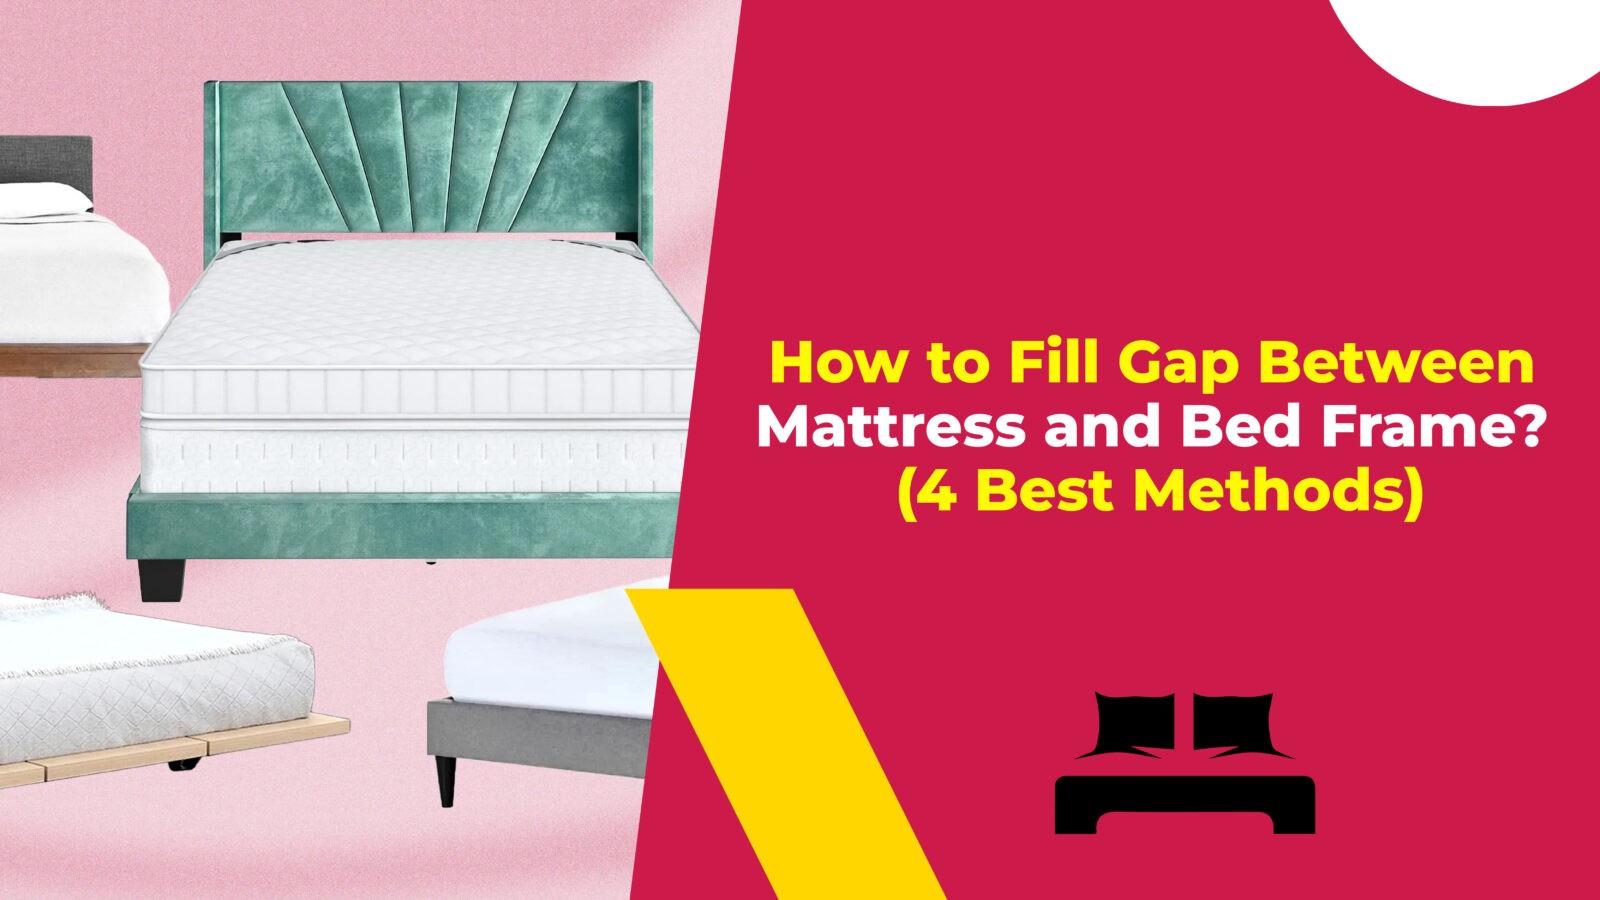 How to Fill Gap Between Mattress and Bed Frame (4 Best Methods)